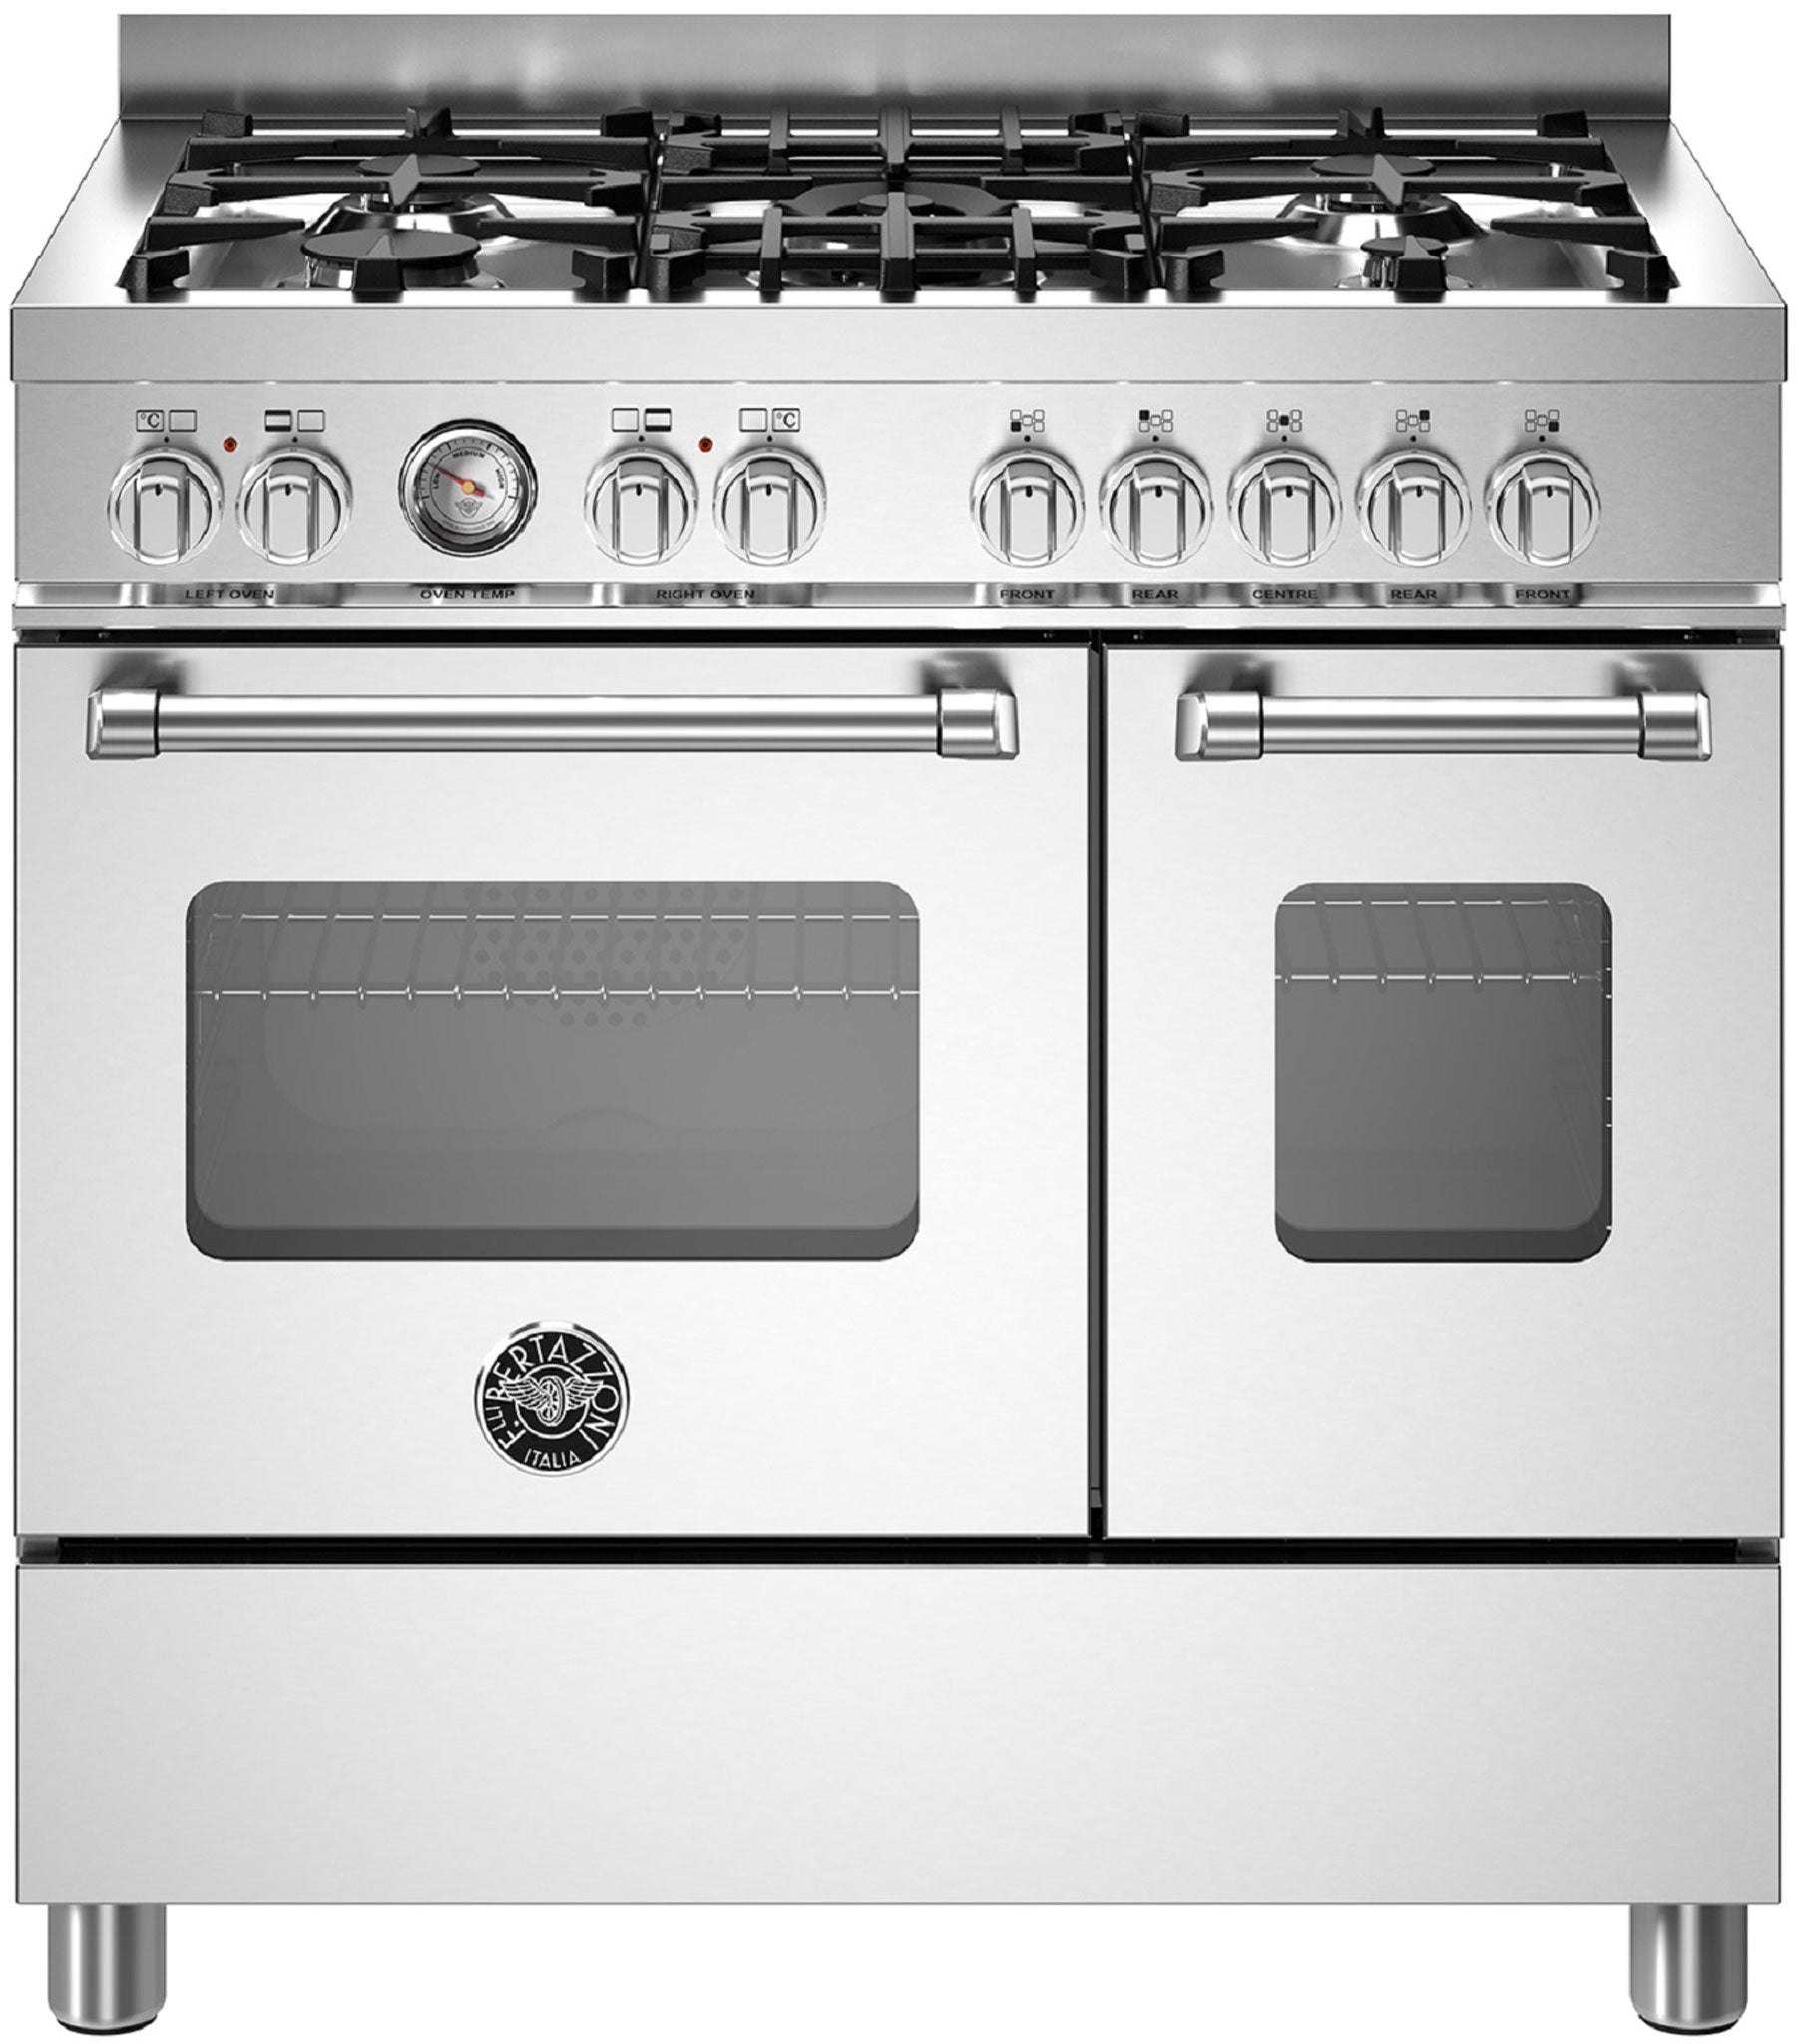 BERTAZZONI MAS95C2EXC 90cm Electric Double Oven 5 burner Gas Hob Range Cooker in Stainless Steel